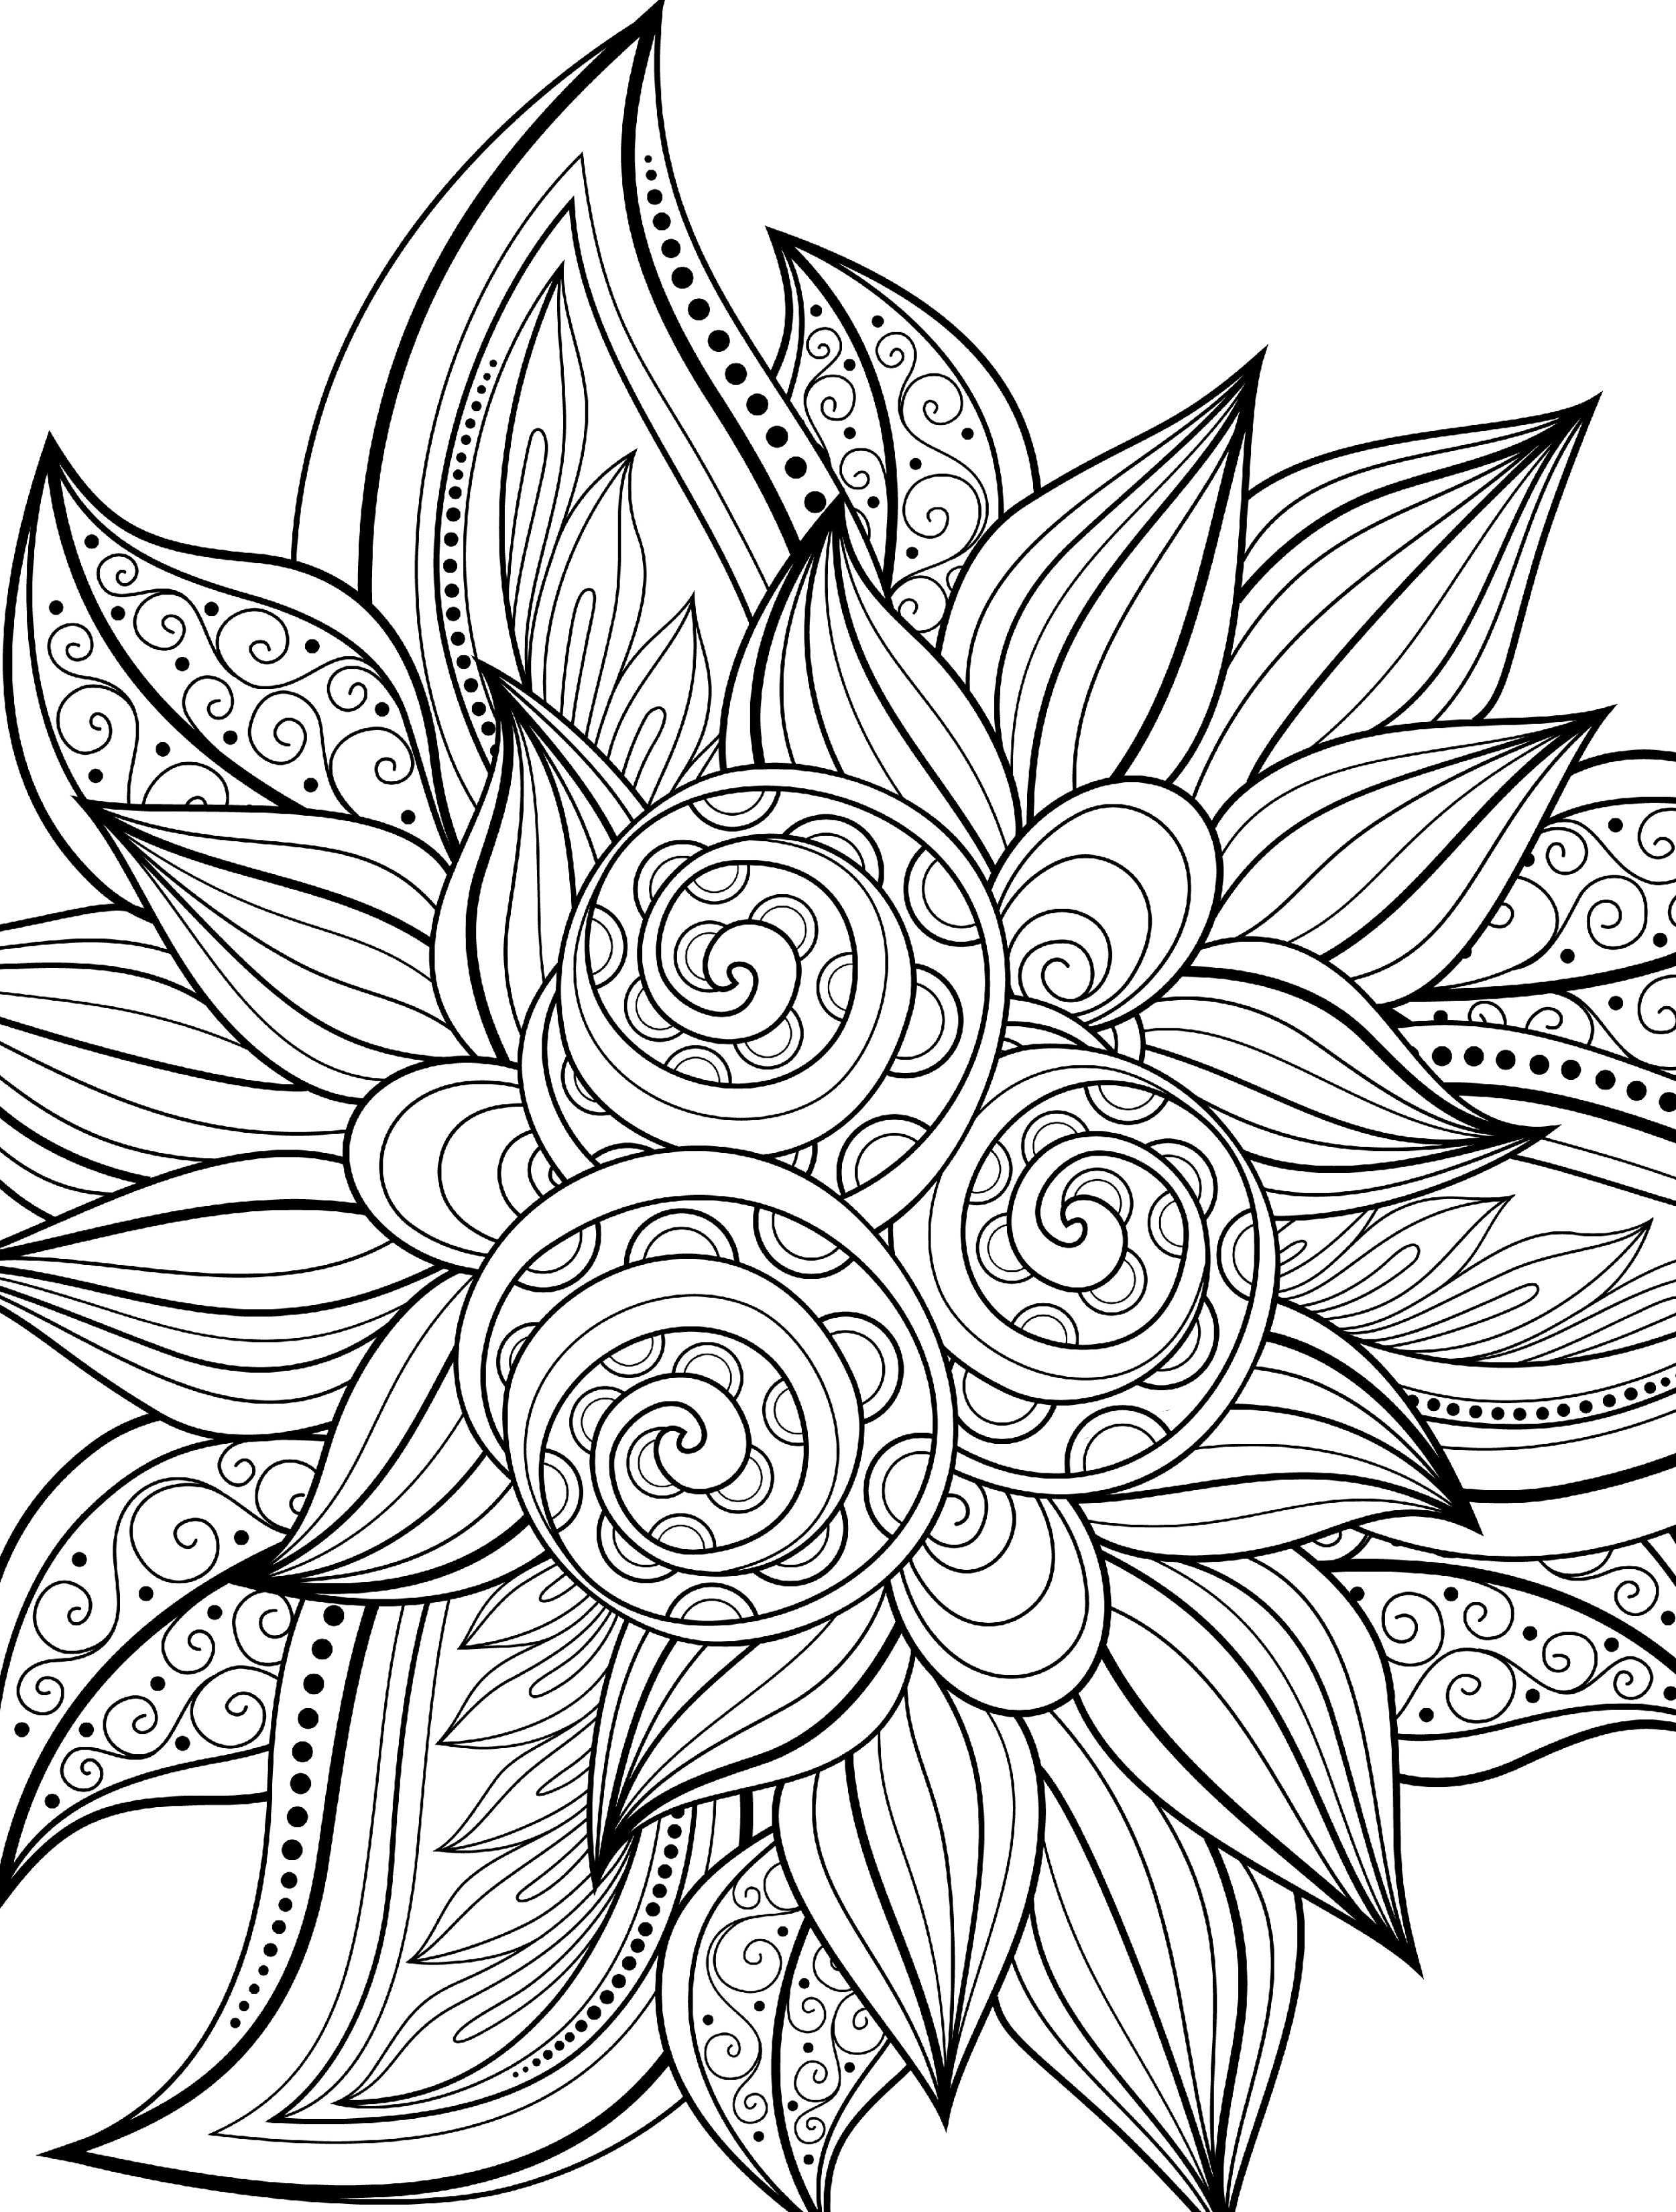 1000+ ideas about Free Coloring Pages | Coloring ...